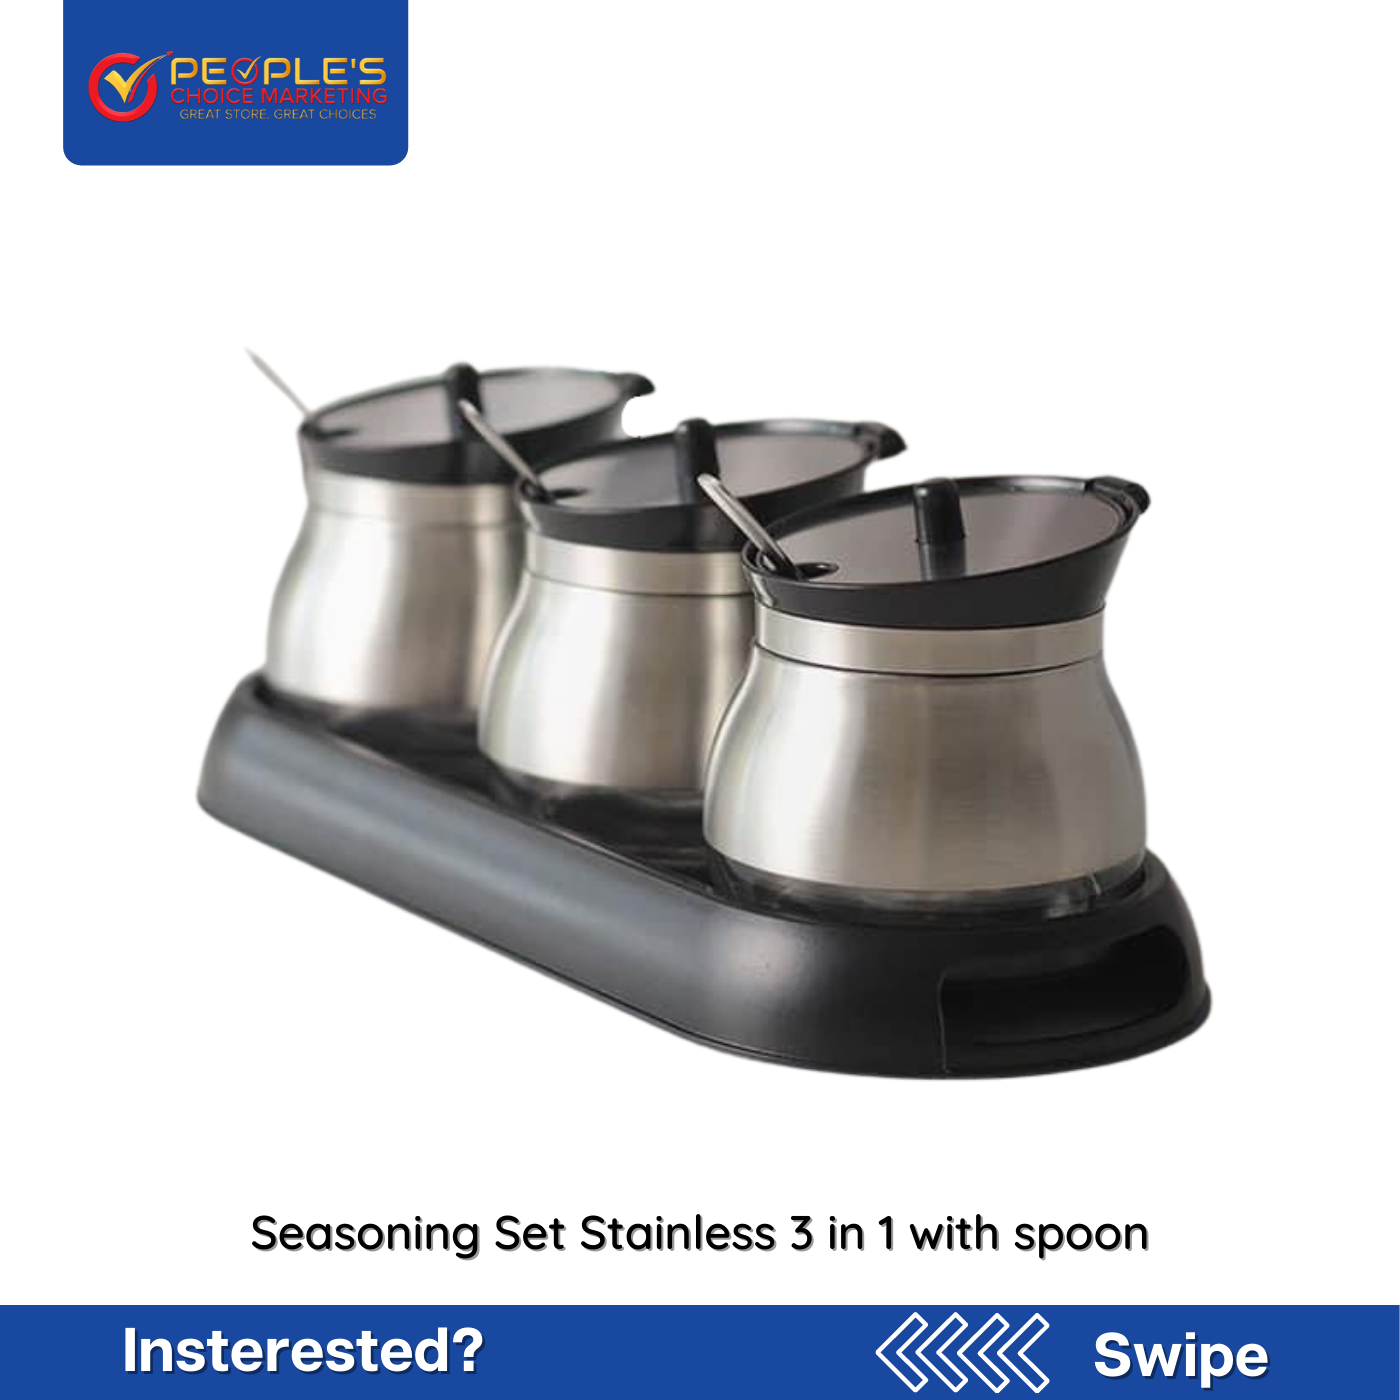 Seasoning Set Stainless 3 in 1 with spoon